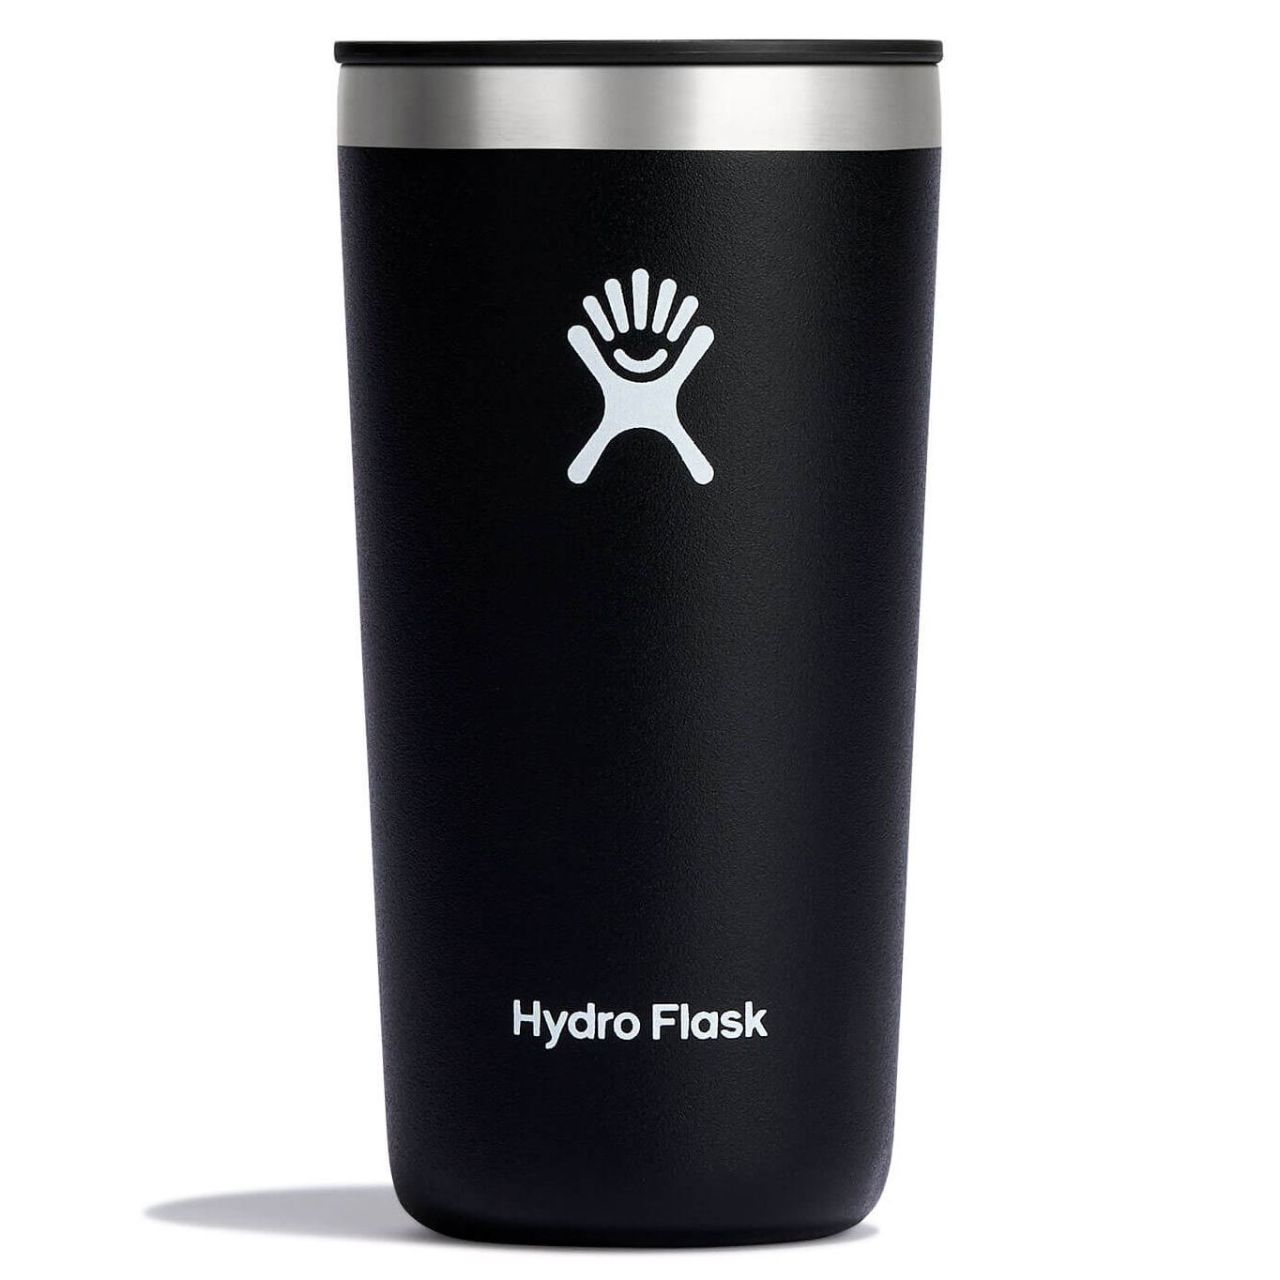 Hydro Flask All Around Tumbler Stainless Steel Insulated With Lid 12 Oz  Pacific